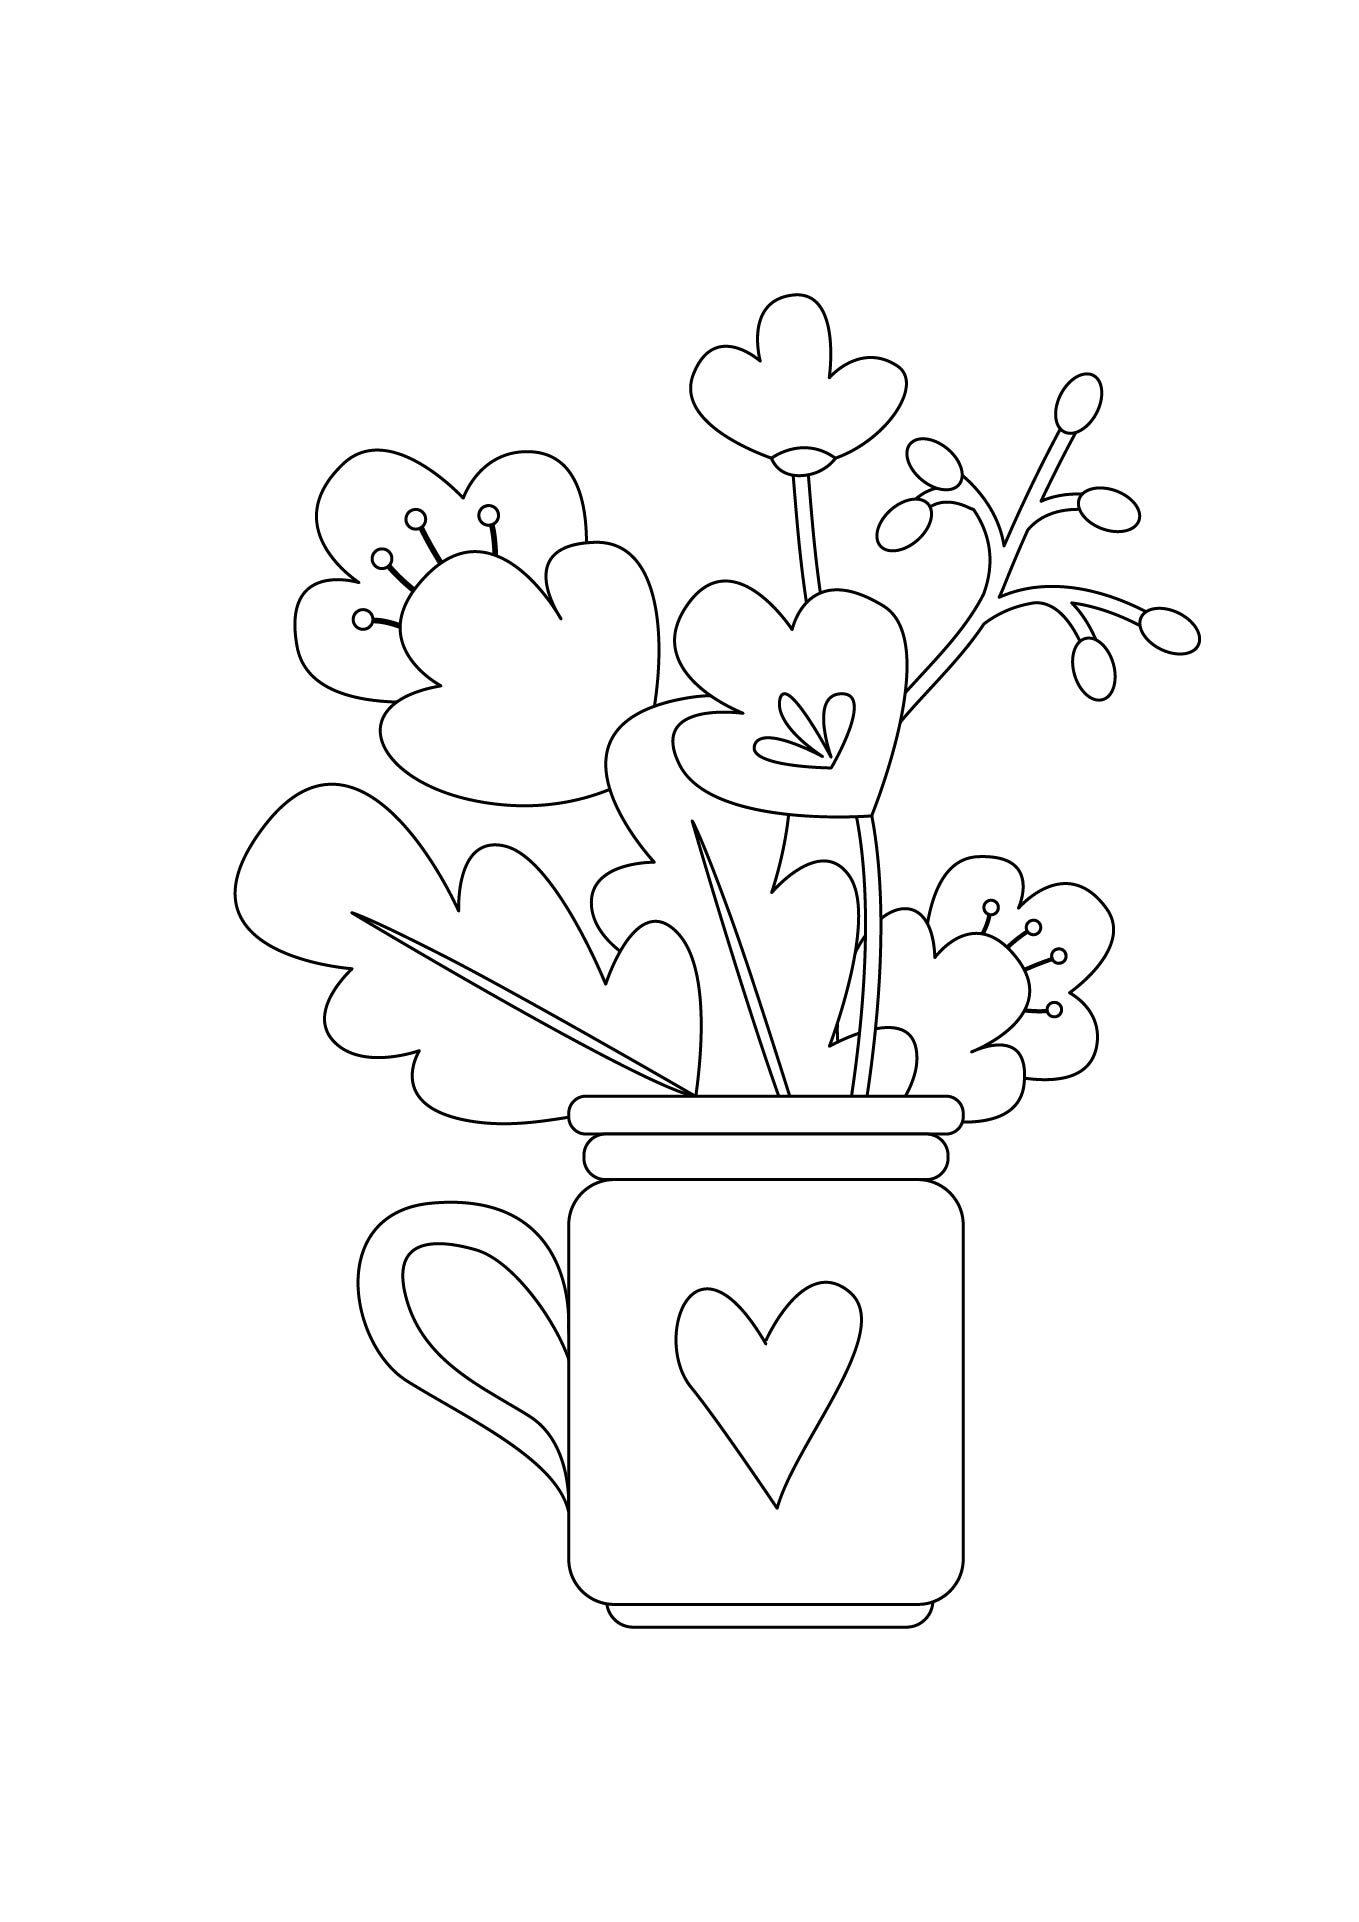 Flower Template Preschool Coloring Pages